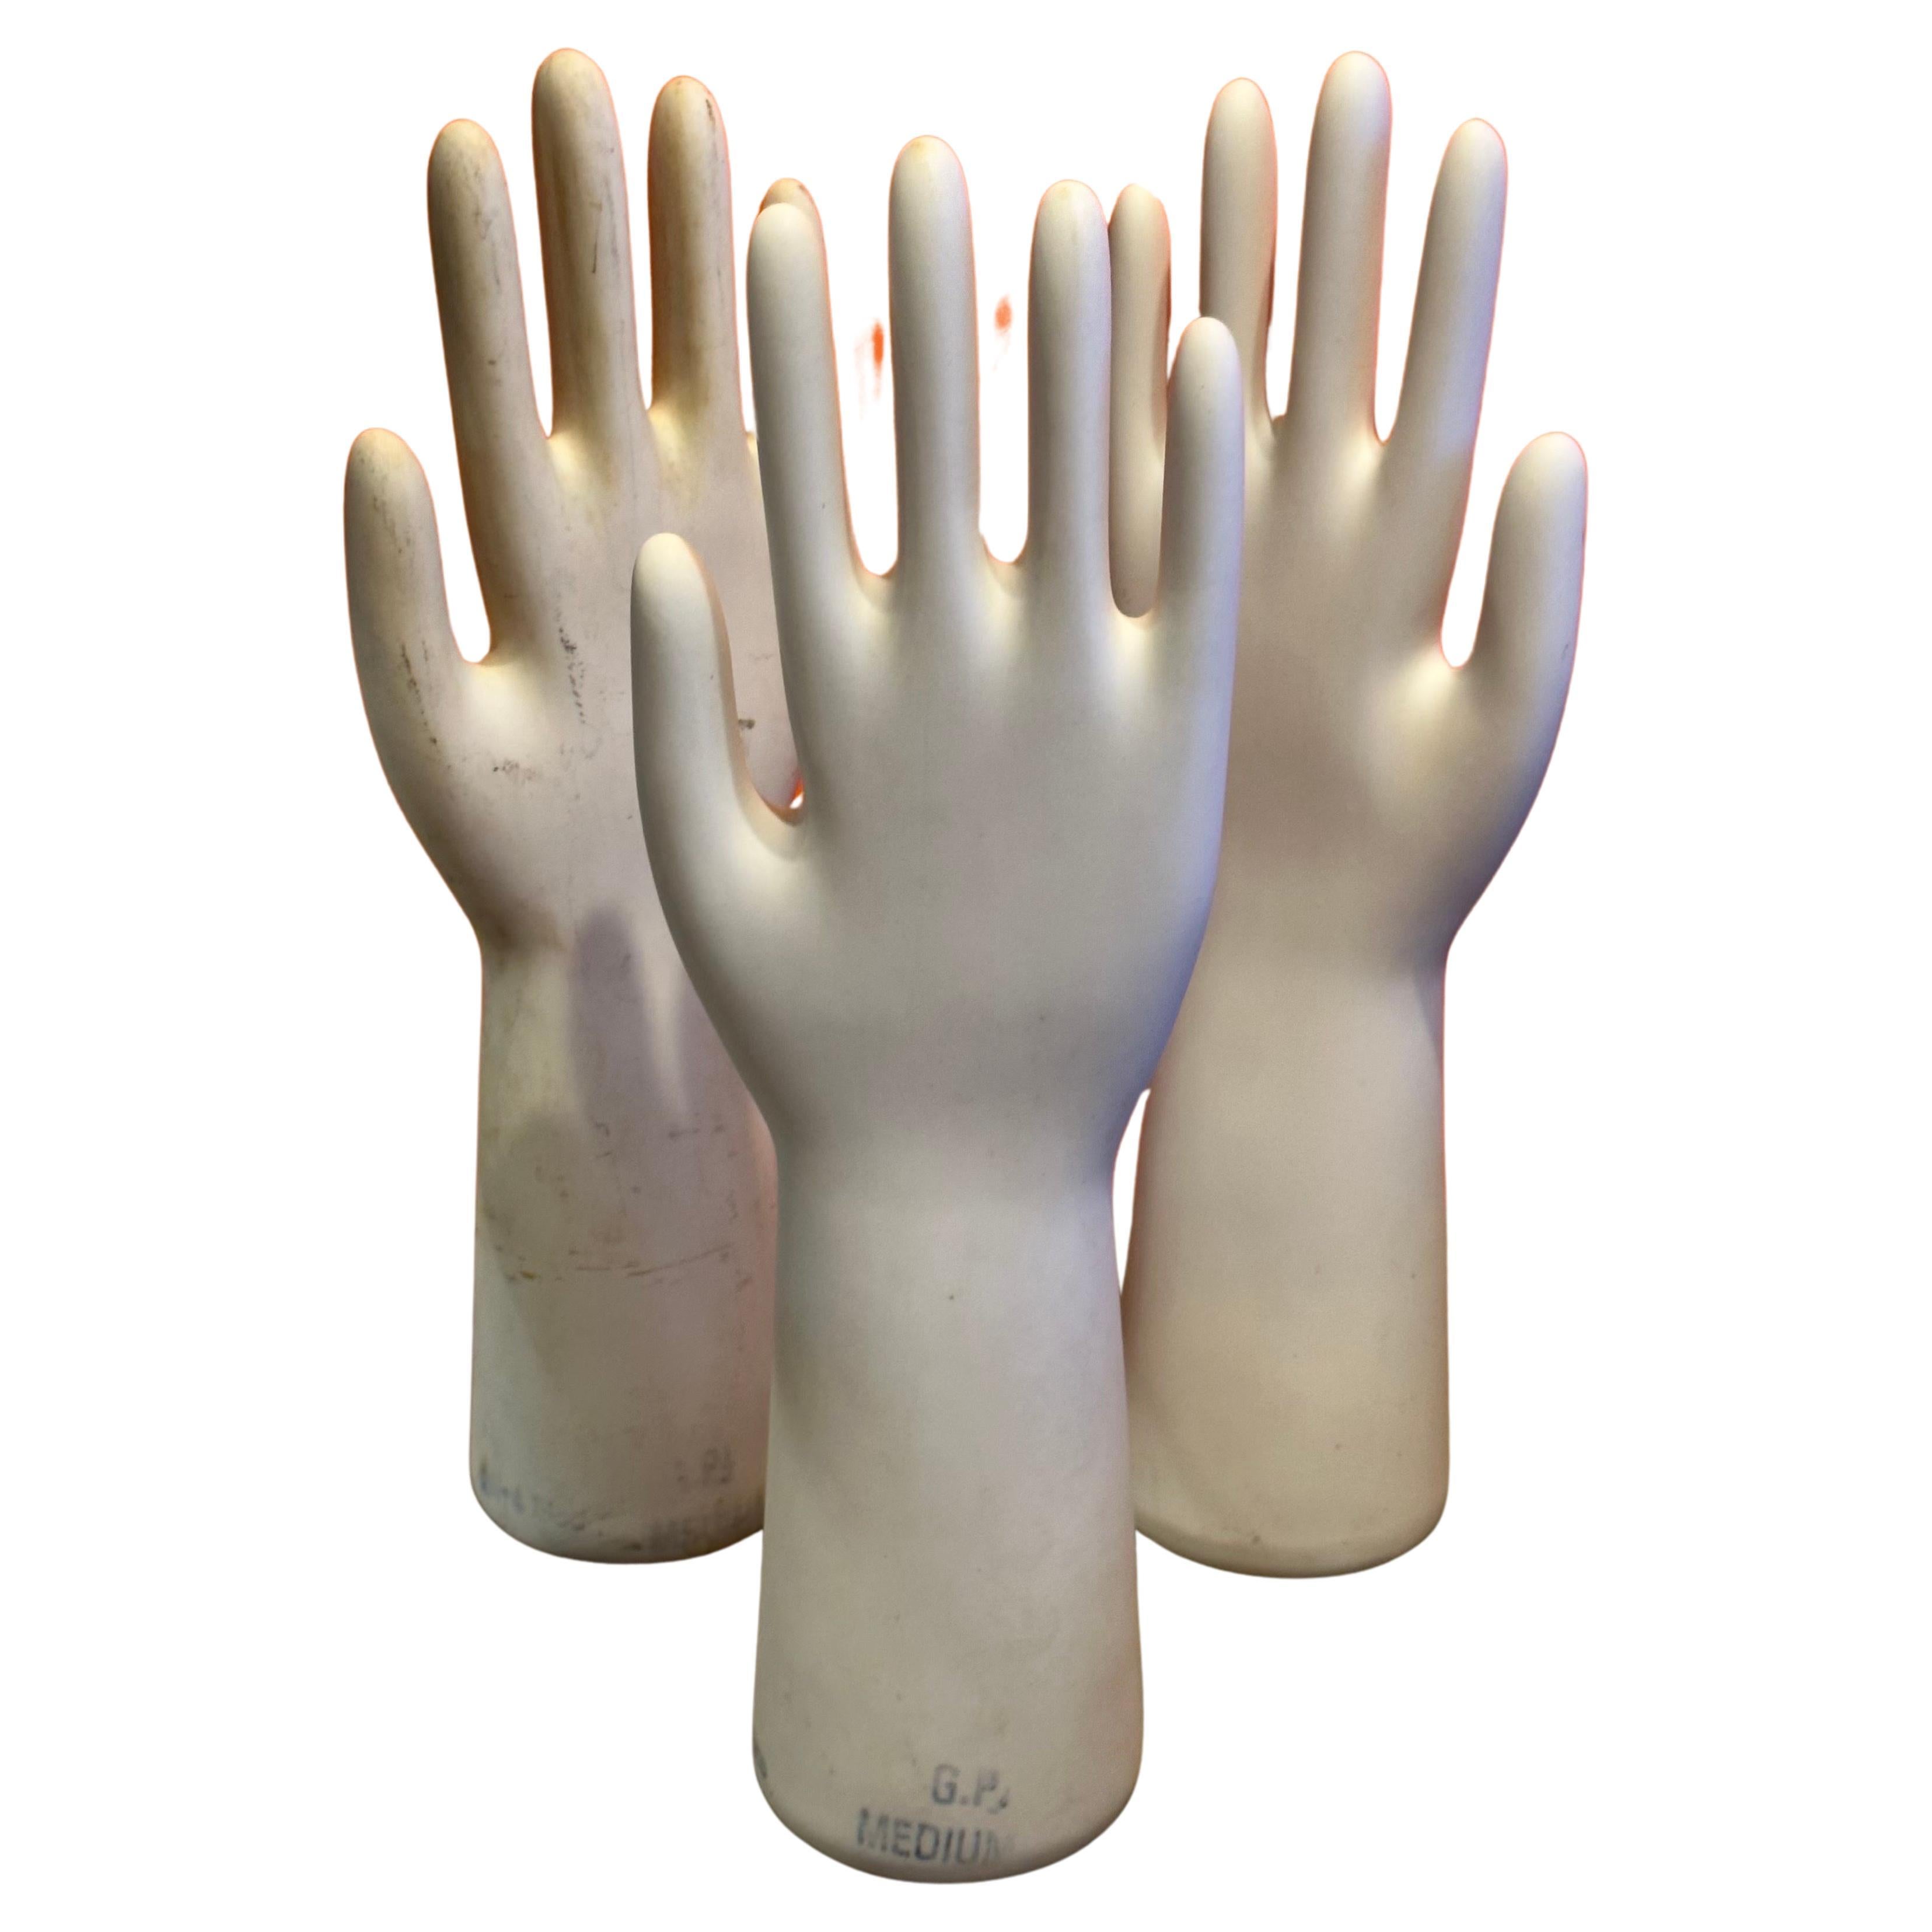 Set of three vintage industrial porcelain glove molds, circa 1980s.  The molds have a great look and make a wonderful modern sculpture.  They are in very good vintage condition with no chips or cracks and measure 4.5